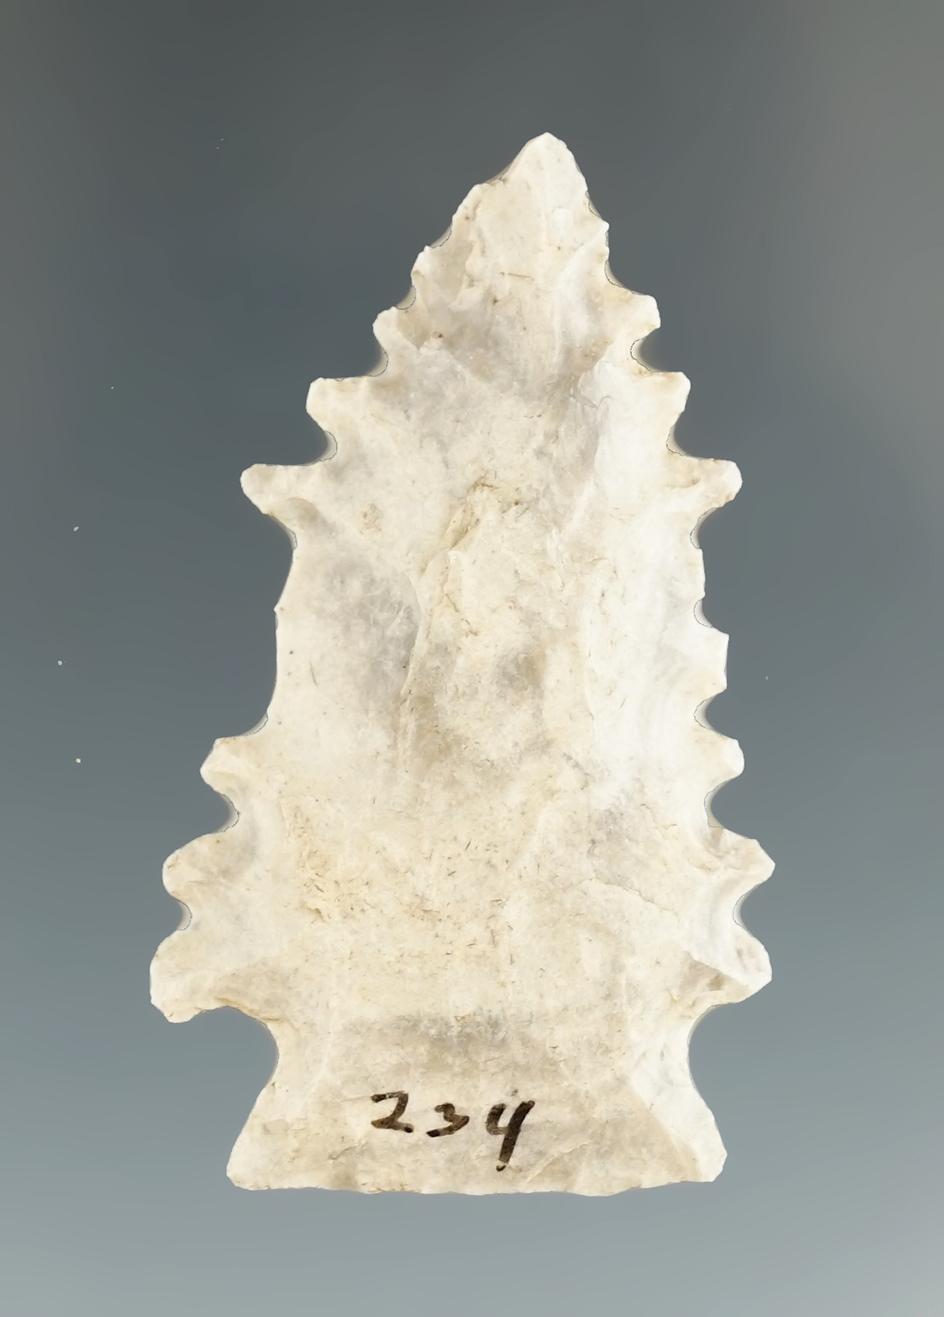 Excellent serrations on this 1 11/16" Archaic Cornernotch made from attractive Mozarkite Flint.